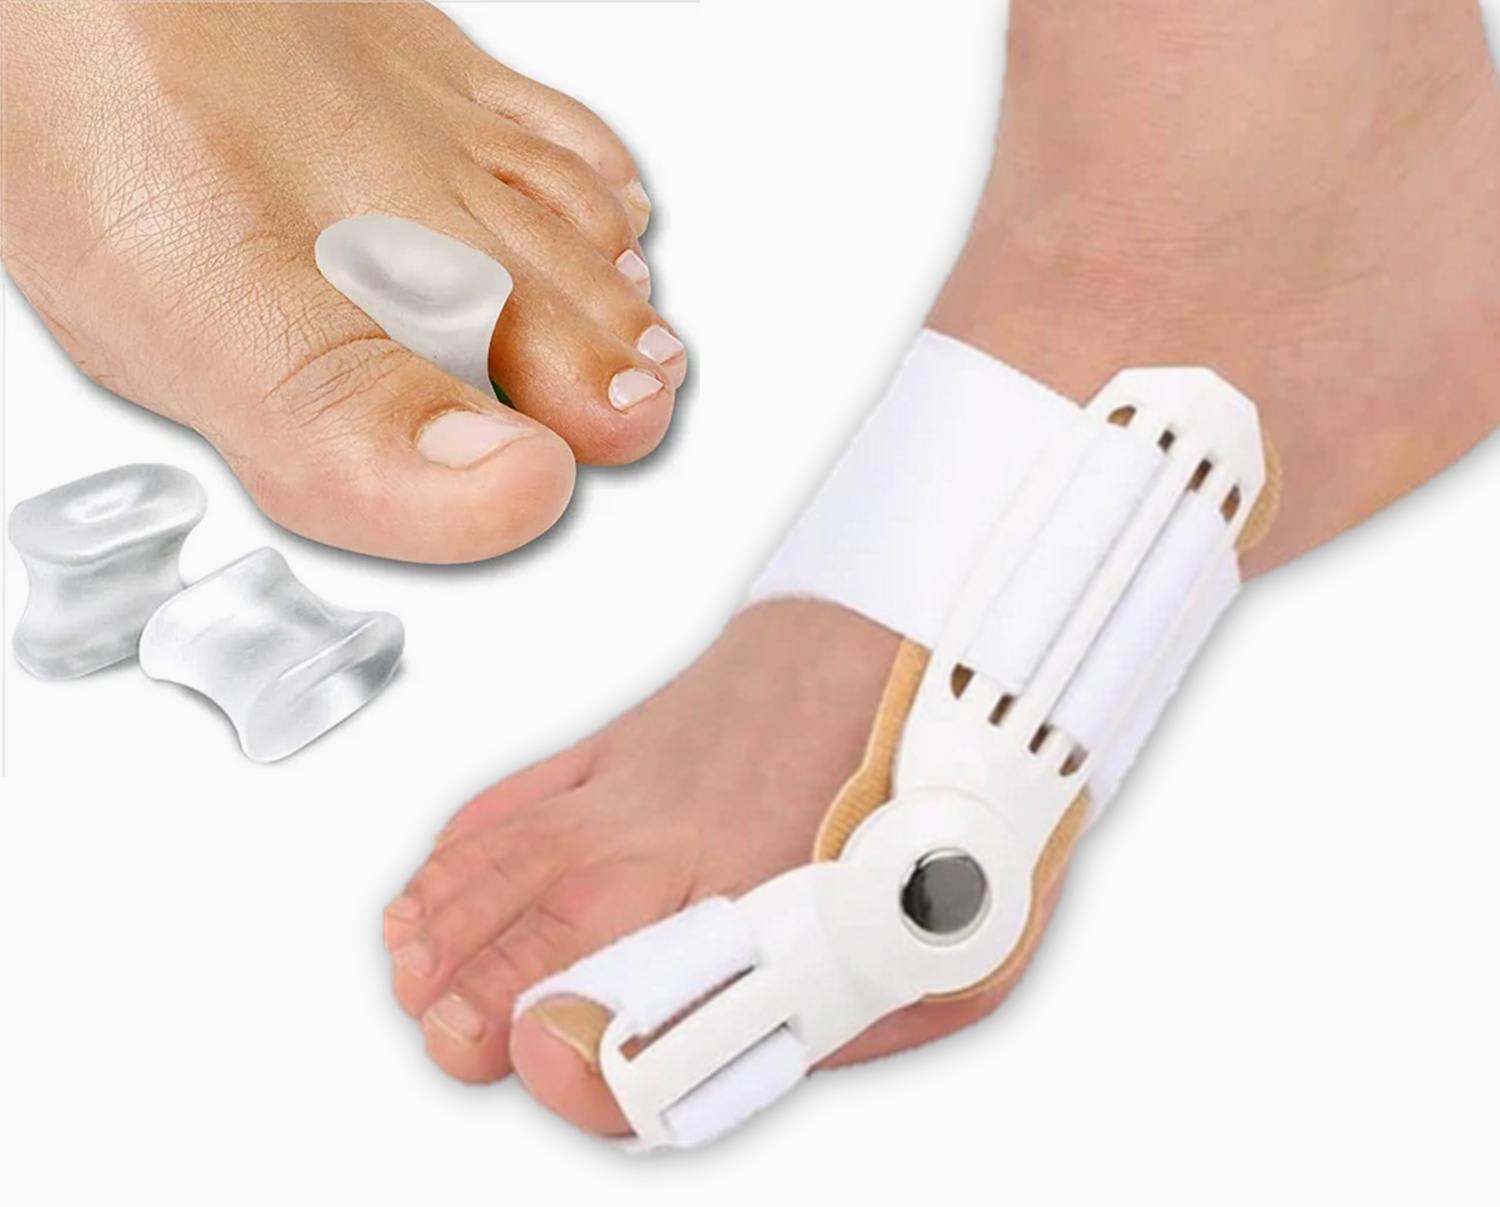 Bummed out over bunions: Do toe spacers and splints actually help